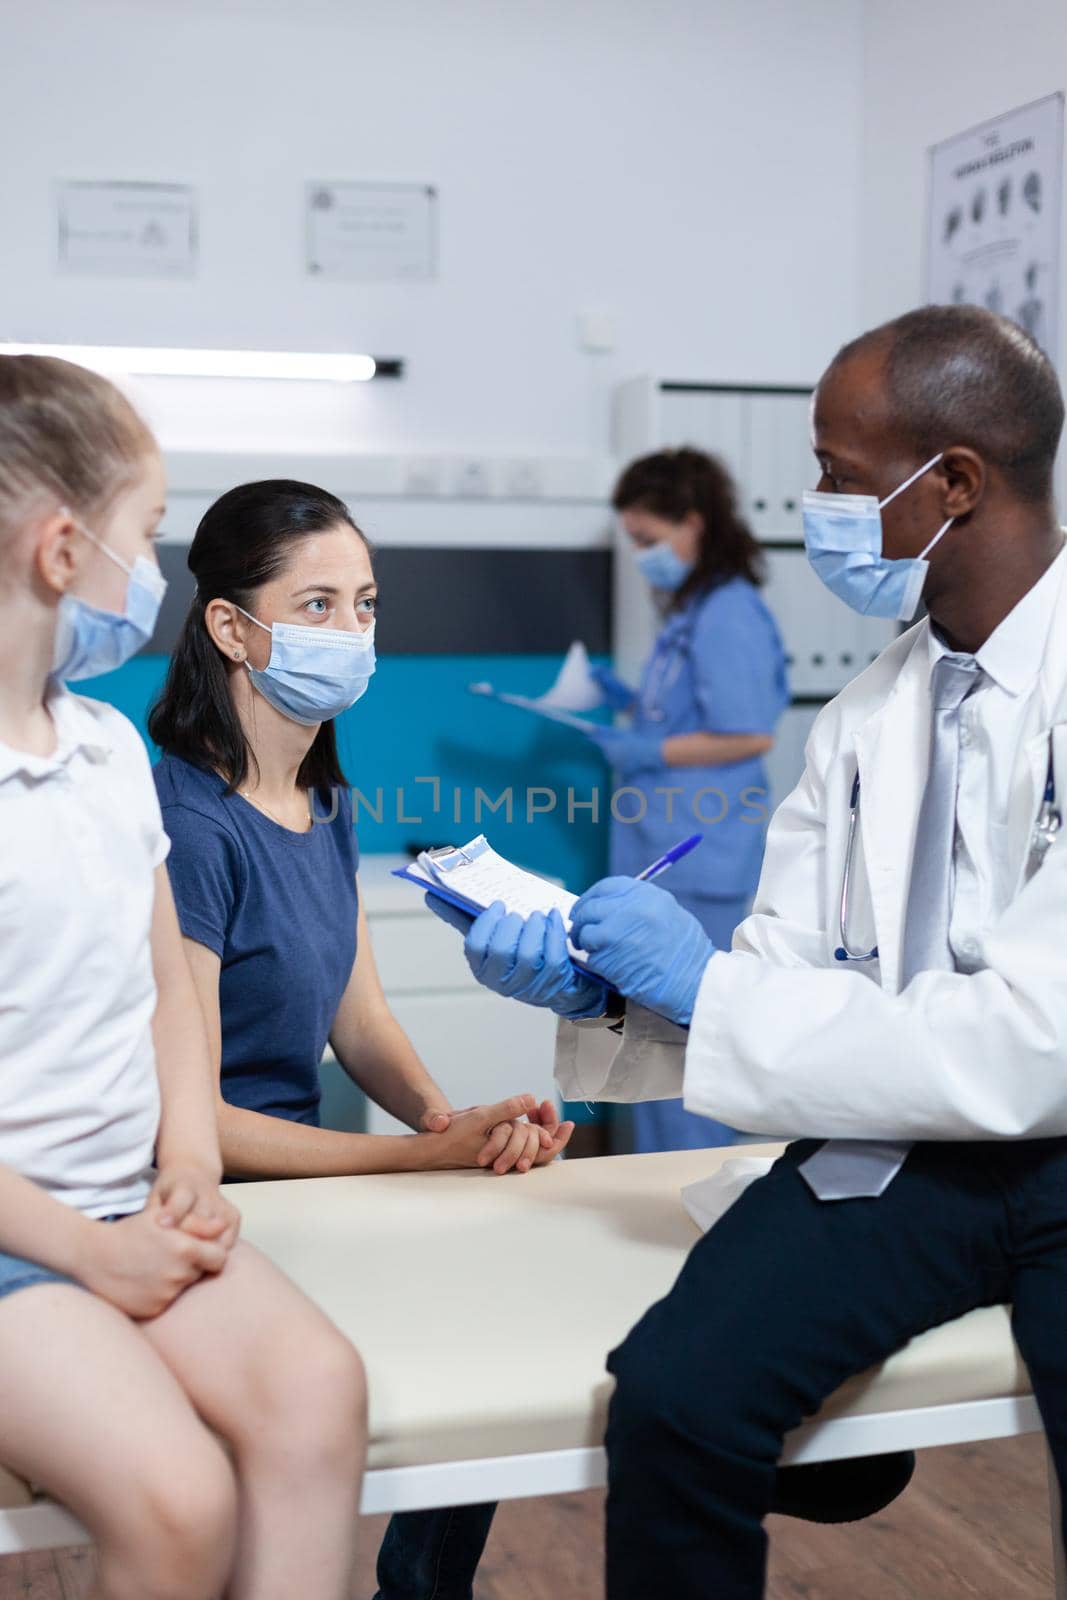 African american pediatrician doctor writing disease symptoms on clipboard discussing healthcare treatment with family during clinical examination in hospital office. Medical team with face mask